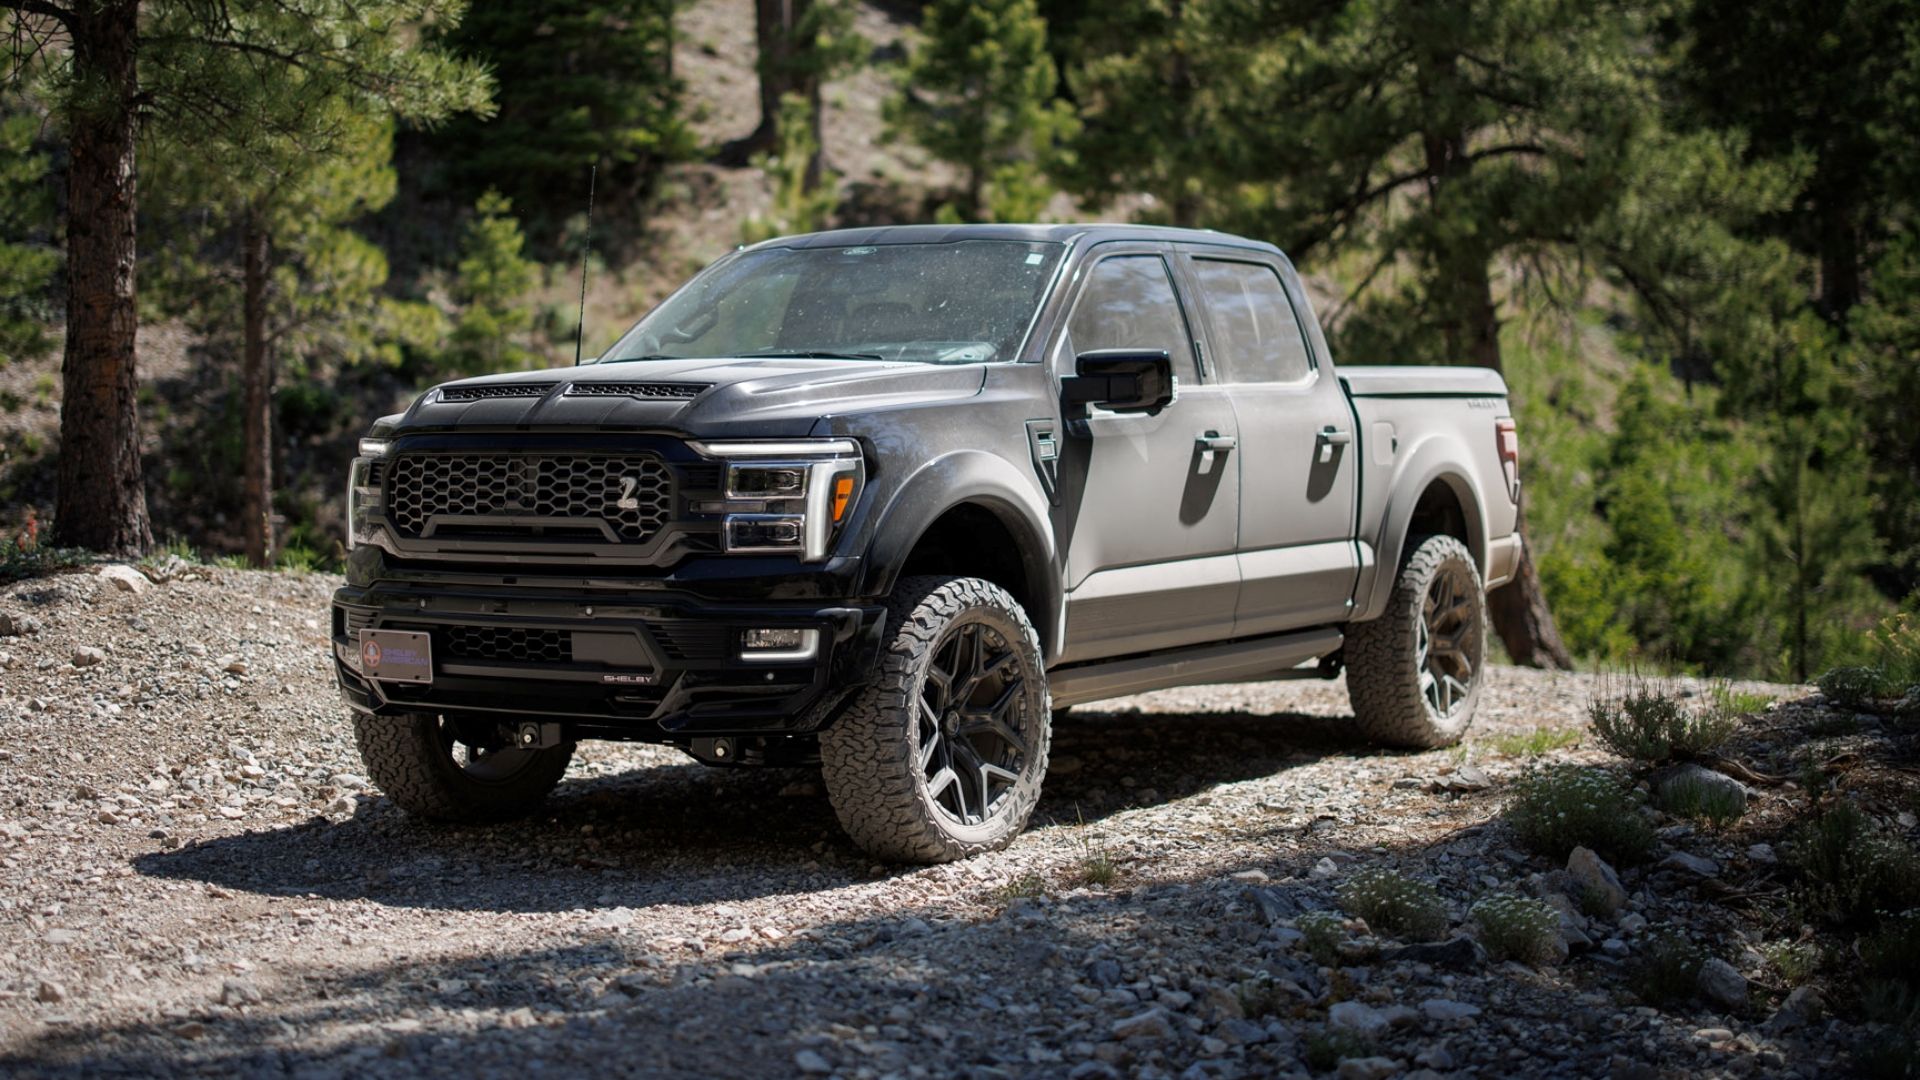 Shelby Built A Ford F-150 To Embarrass The Raptor R